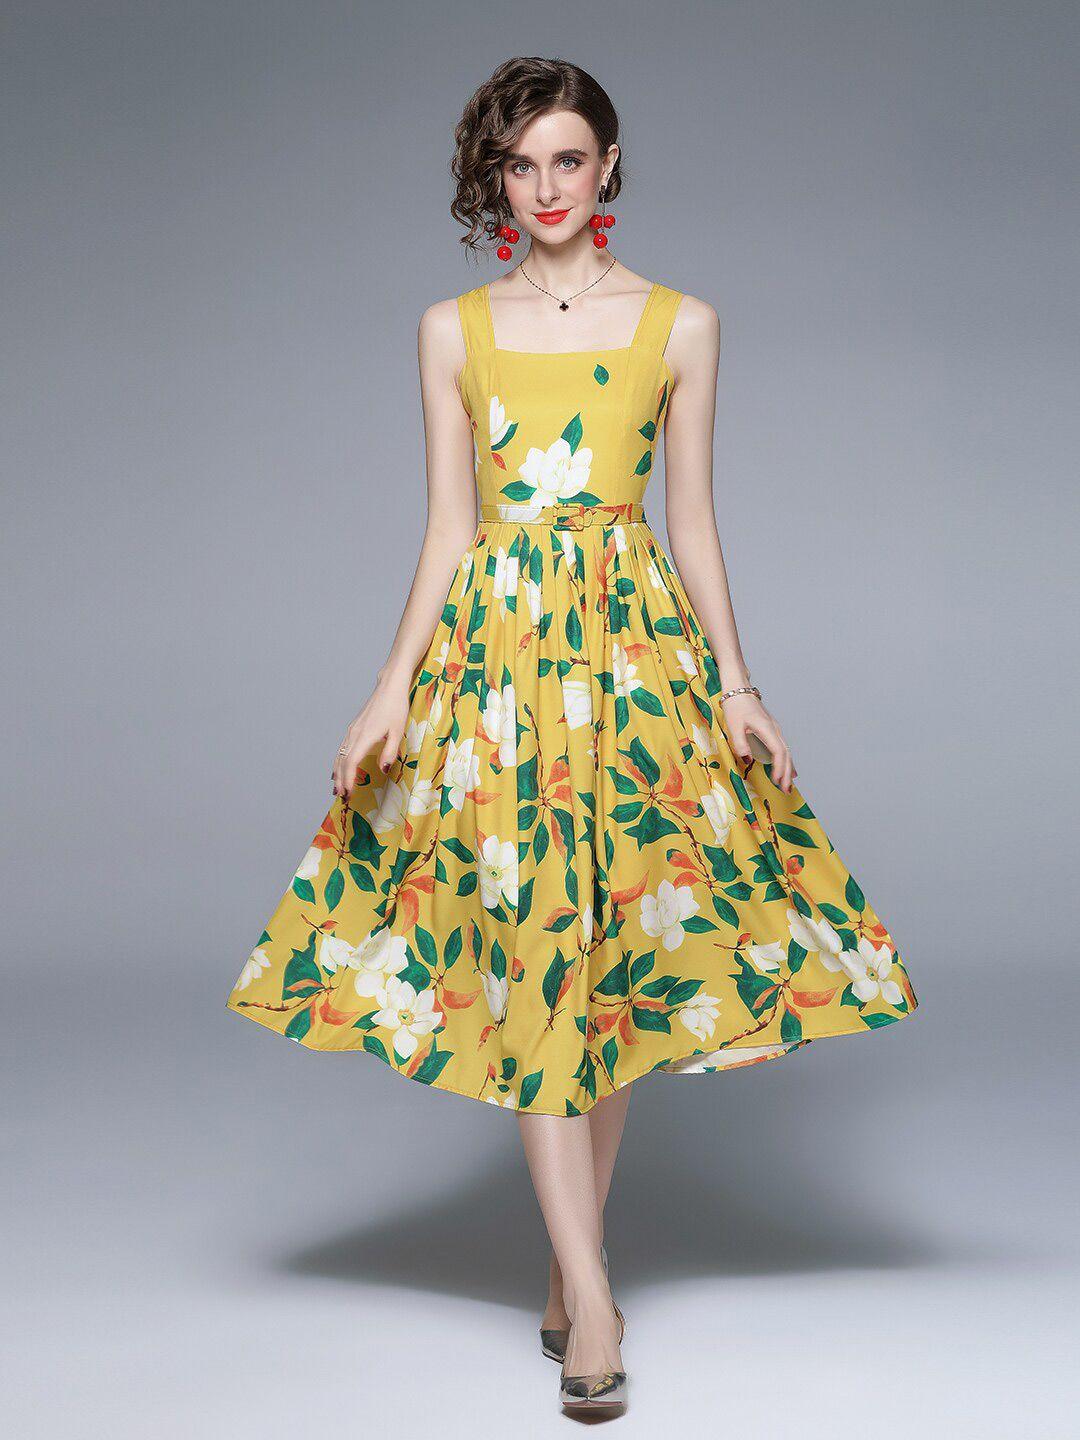 jc collection yellow & green floral midi dress